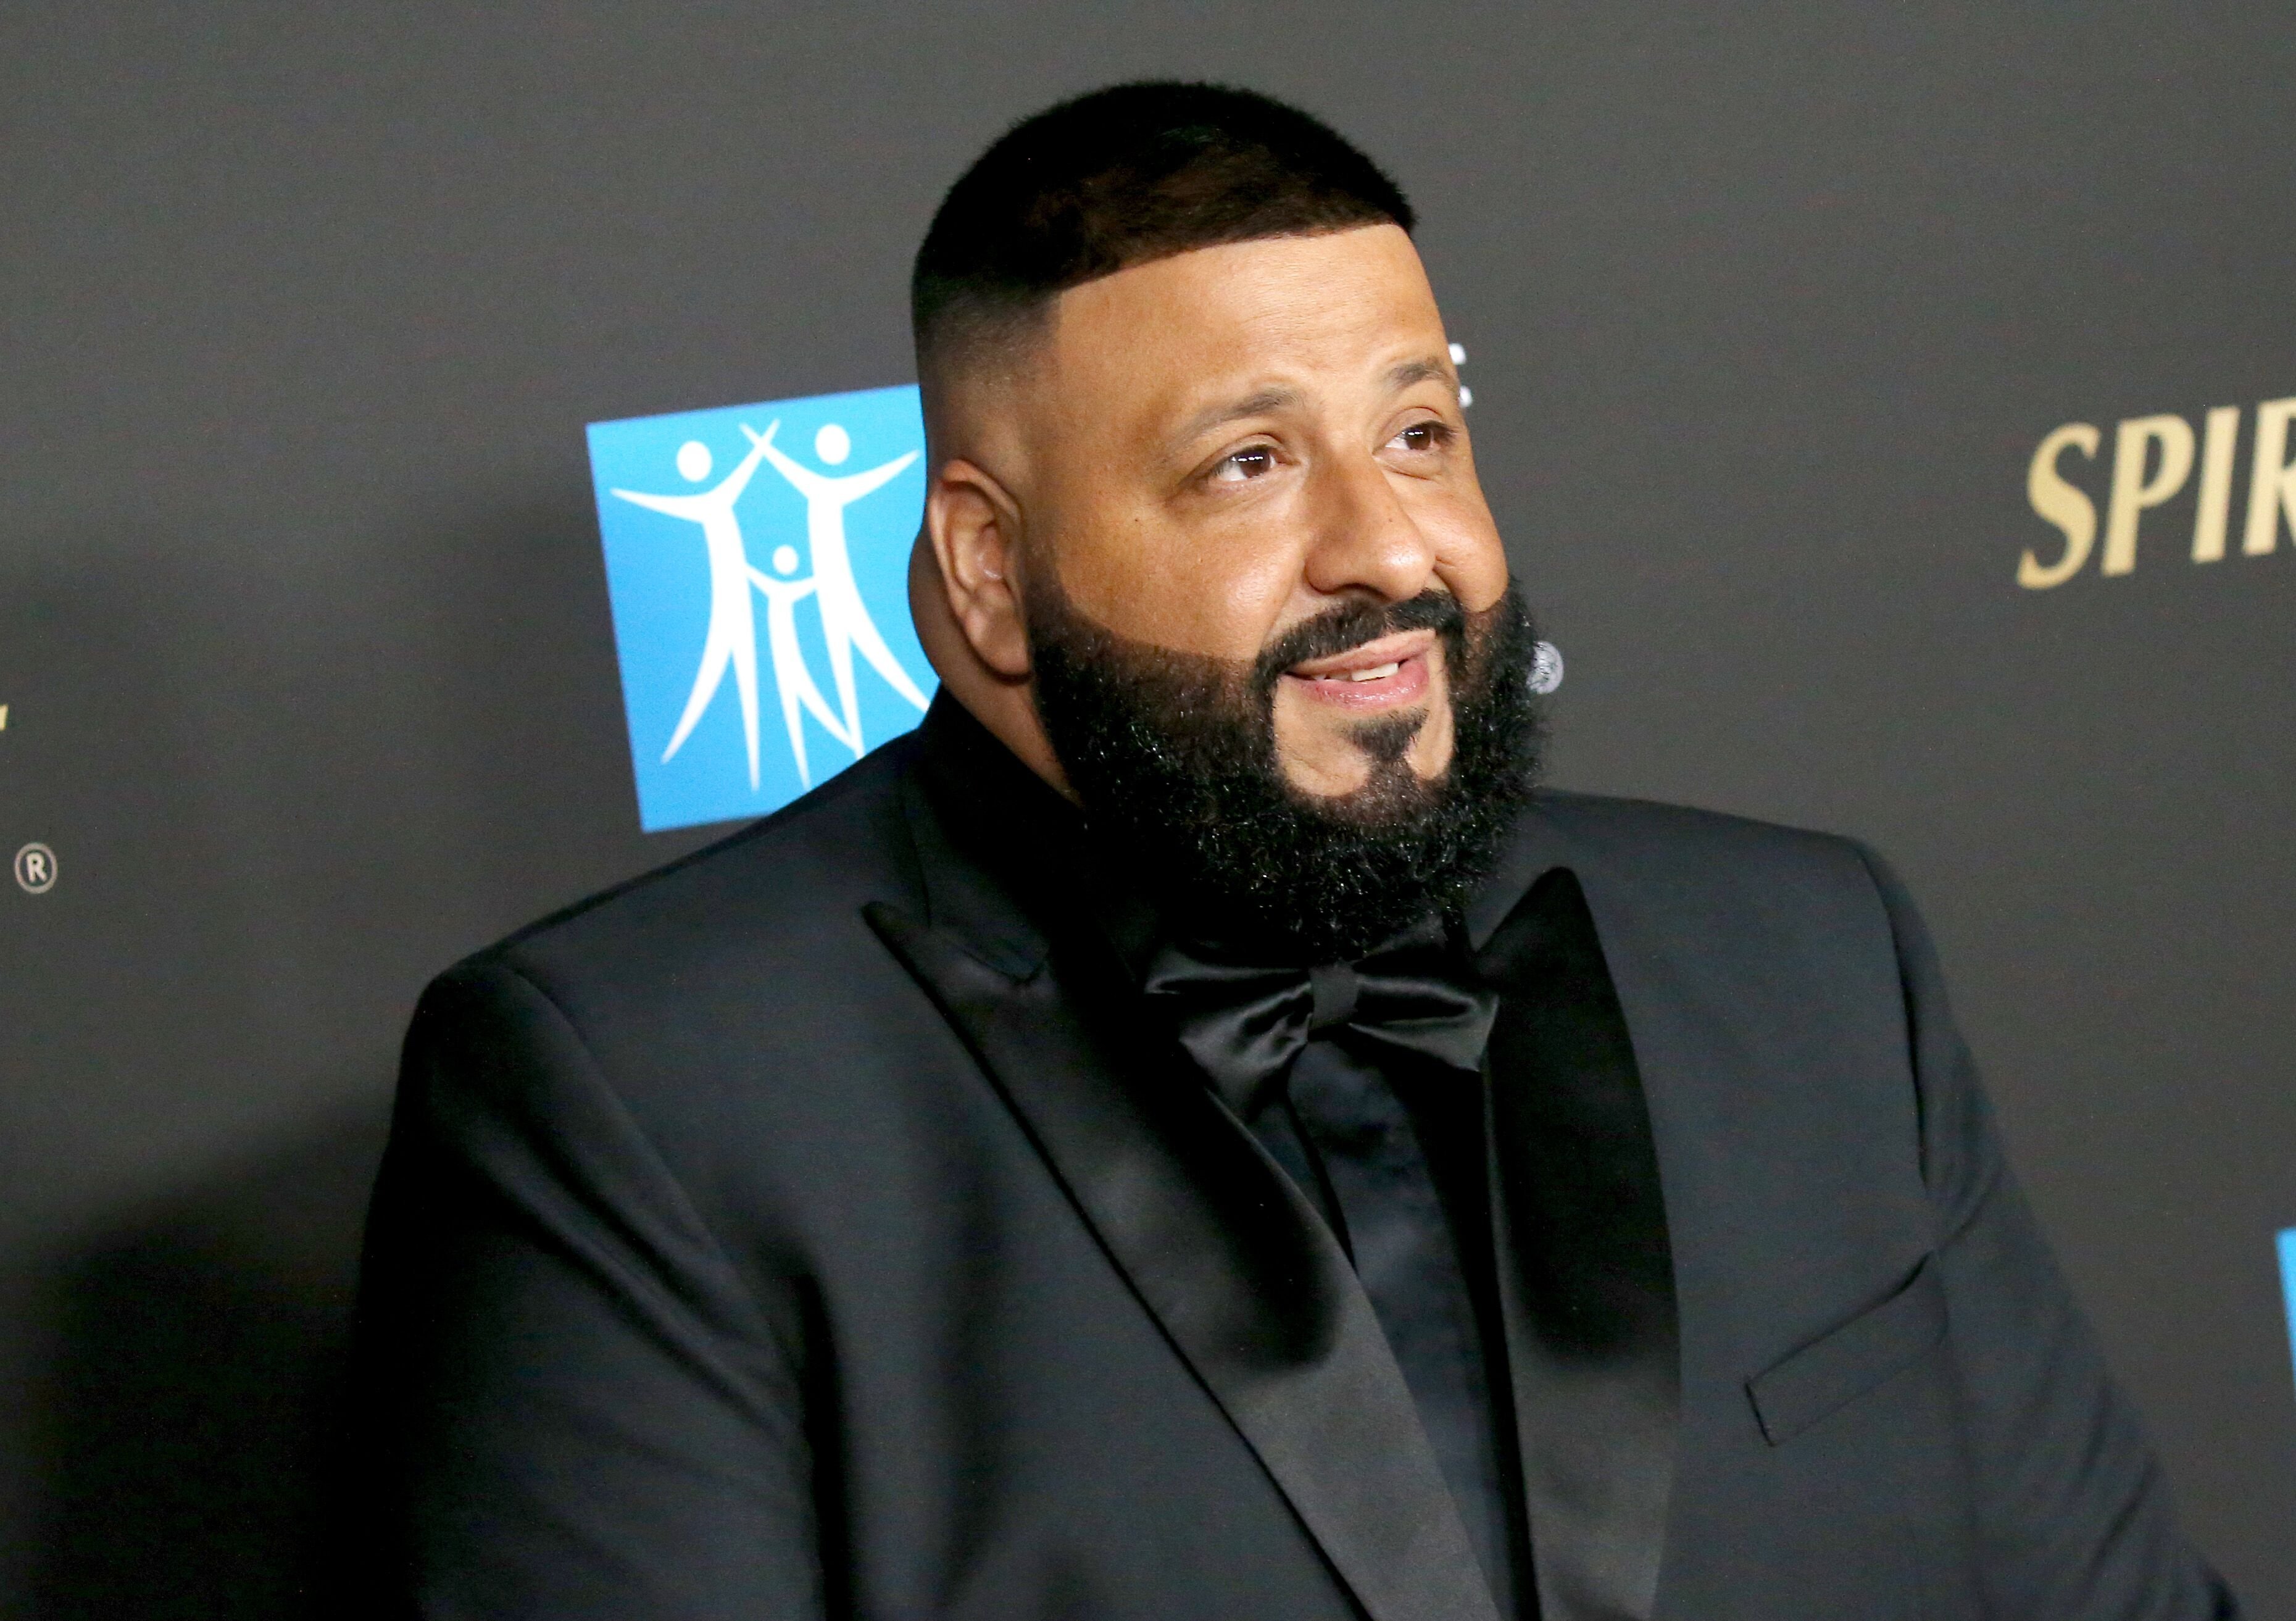 DJ Khaled attends the City Of Hope's Spirit of Life 2019 Gala on October 10, 2019. | Photo: Getty Images